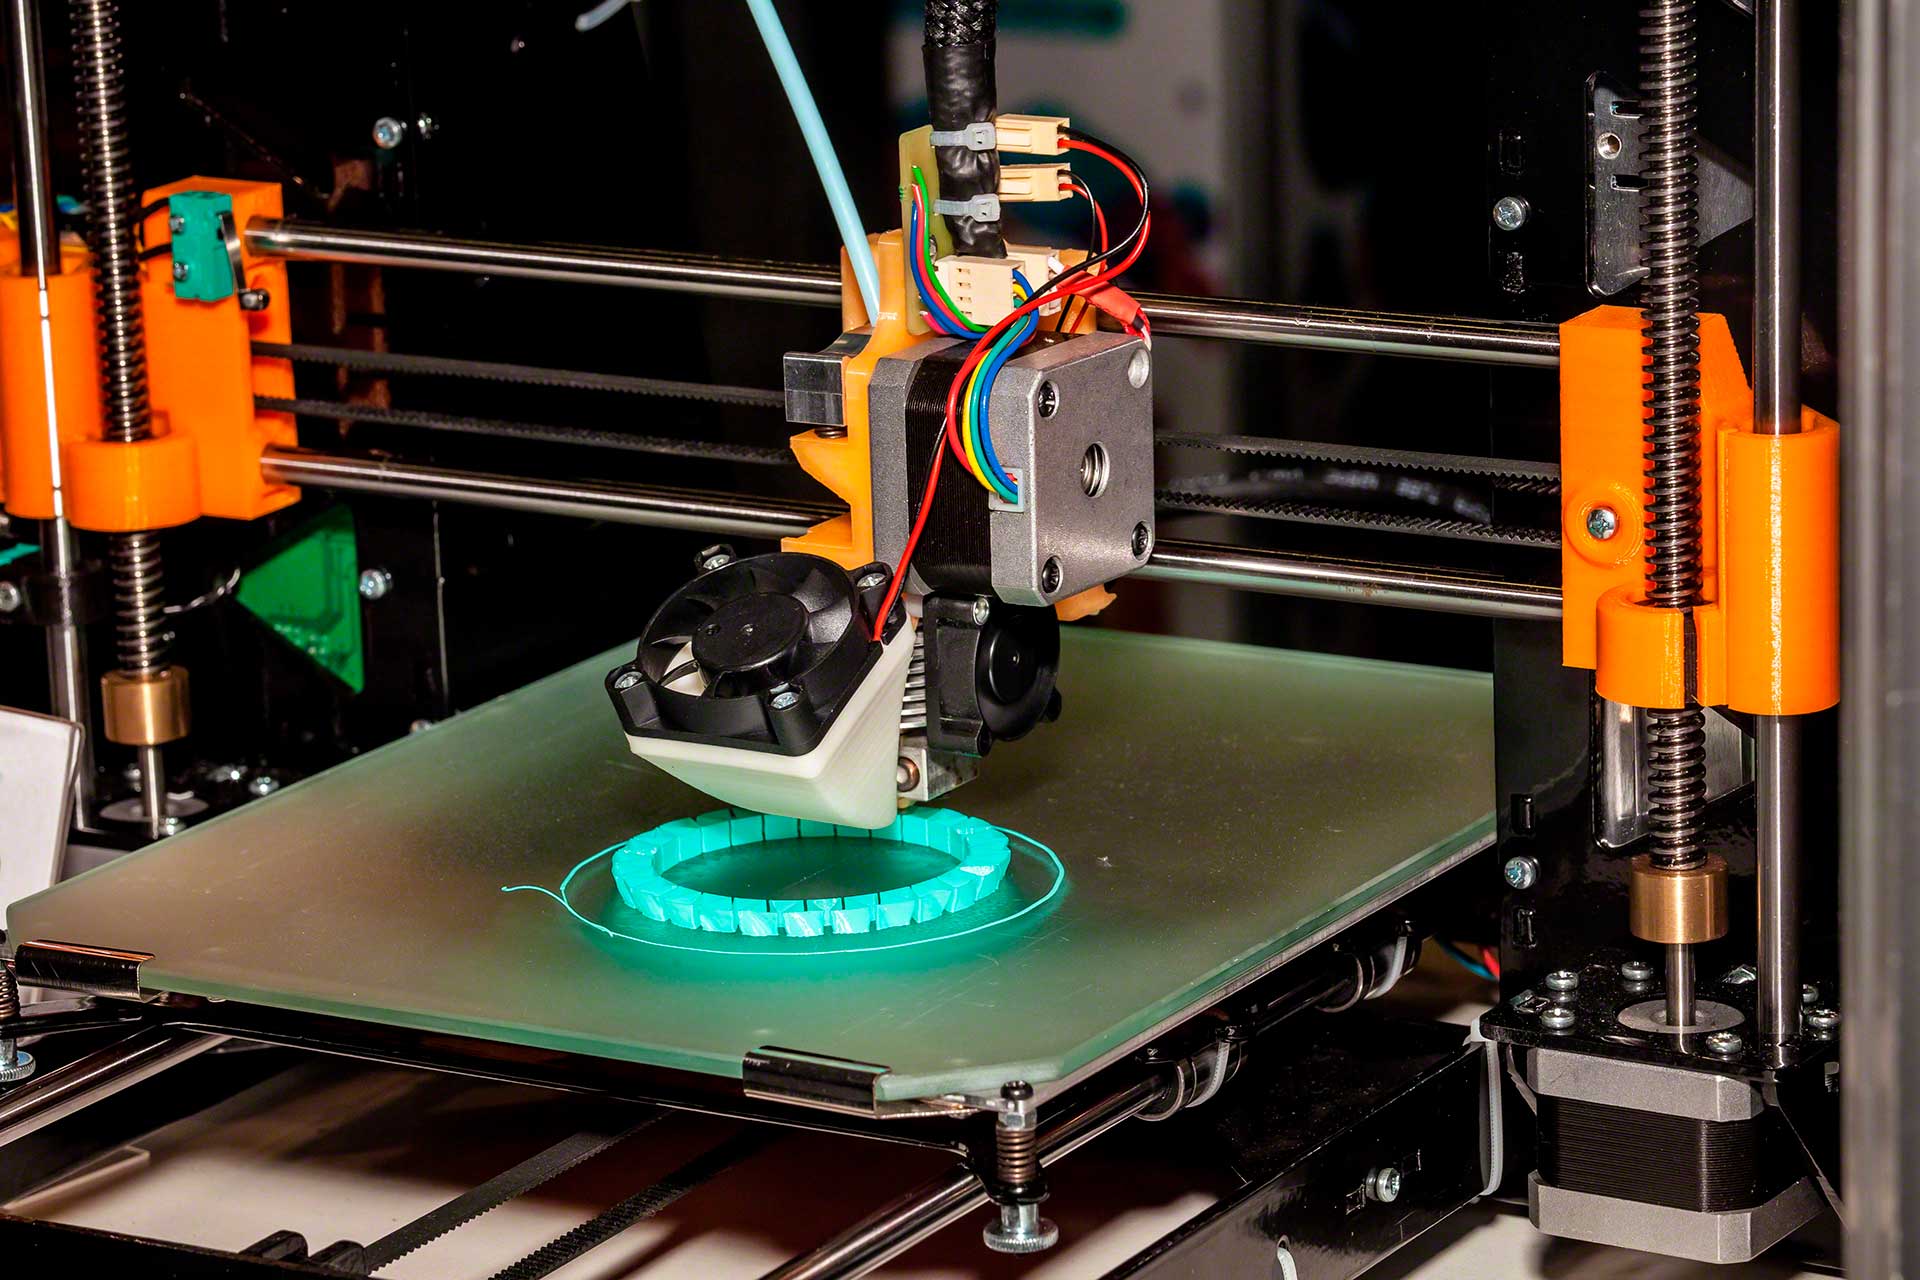 3D printing is a disruptive technology with the potential to transform the supply chain